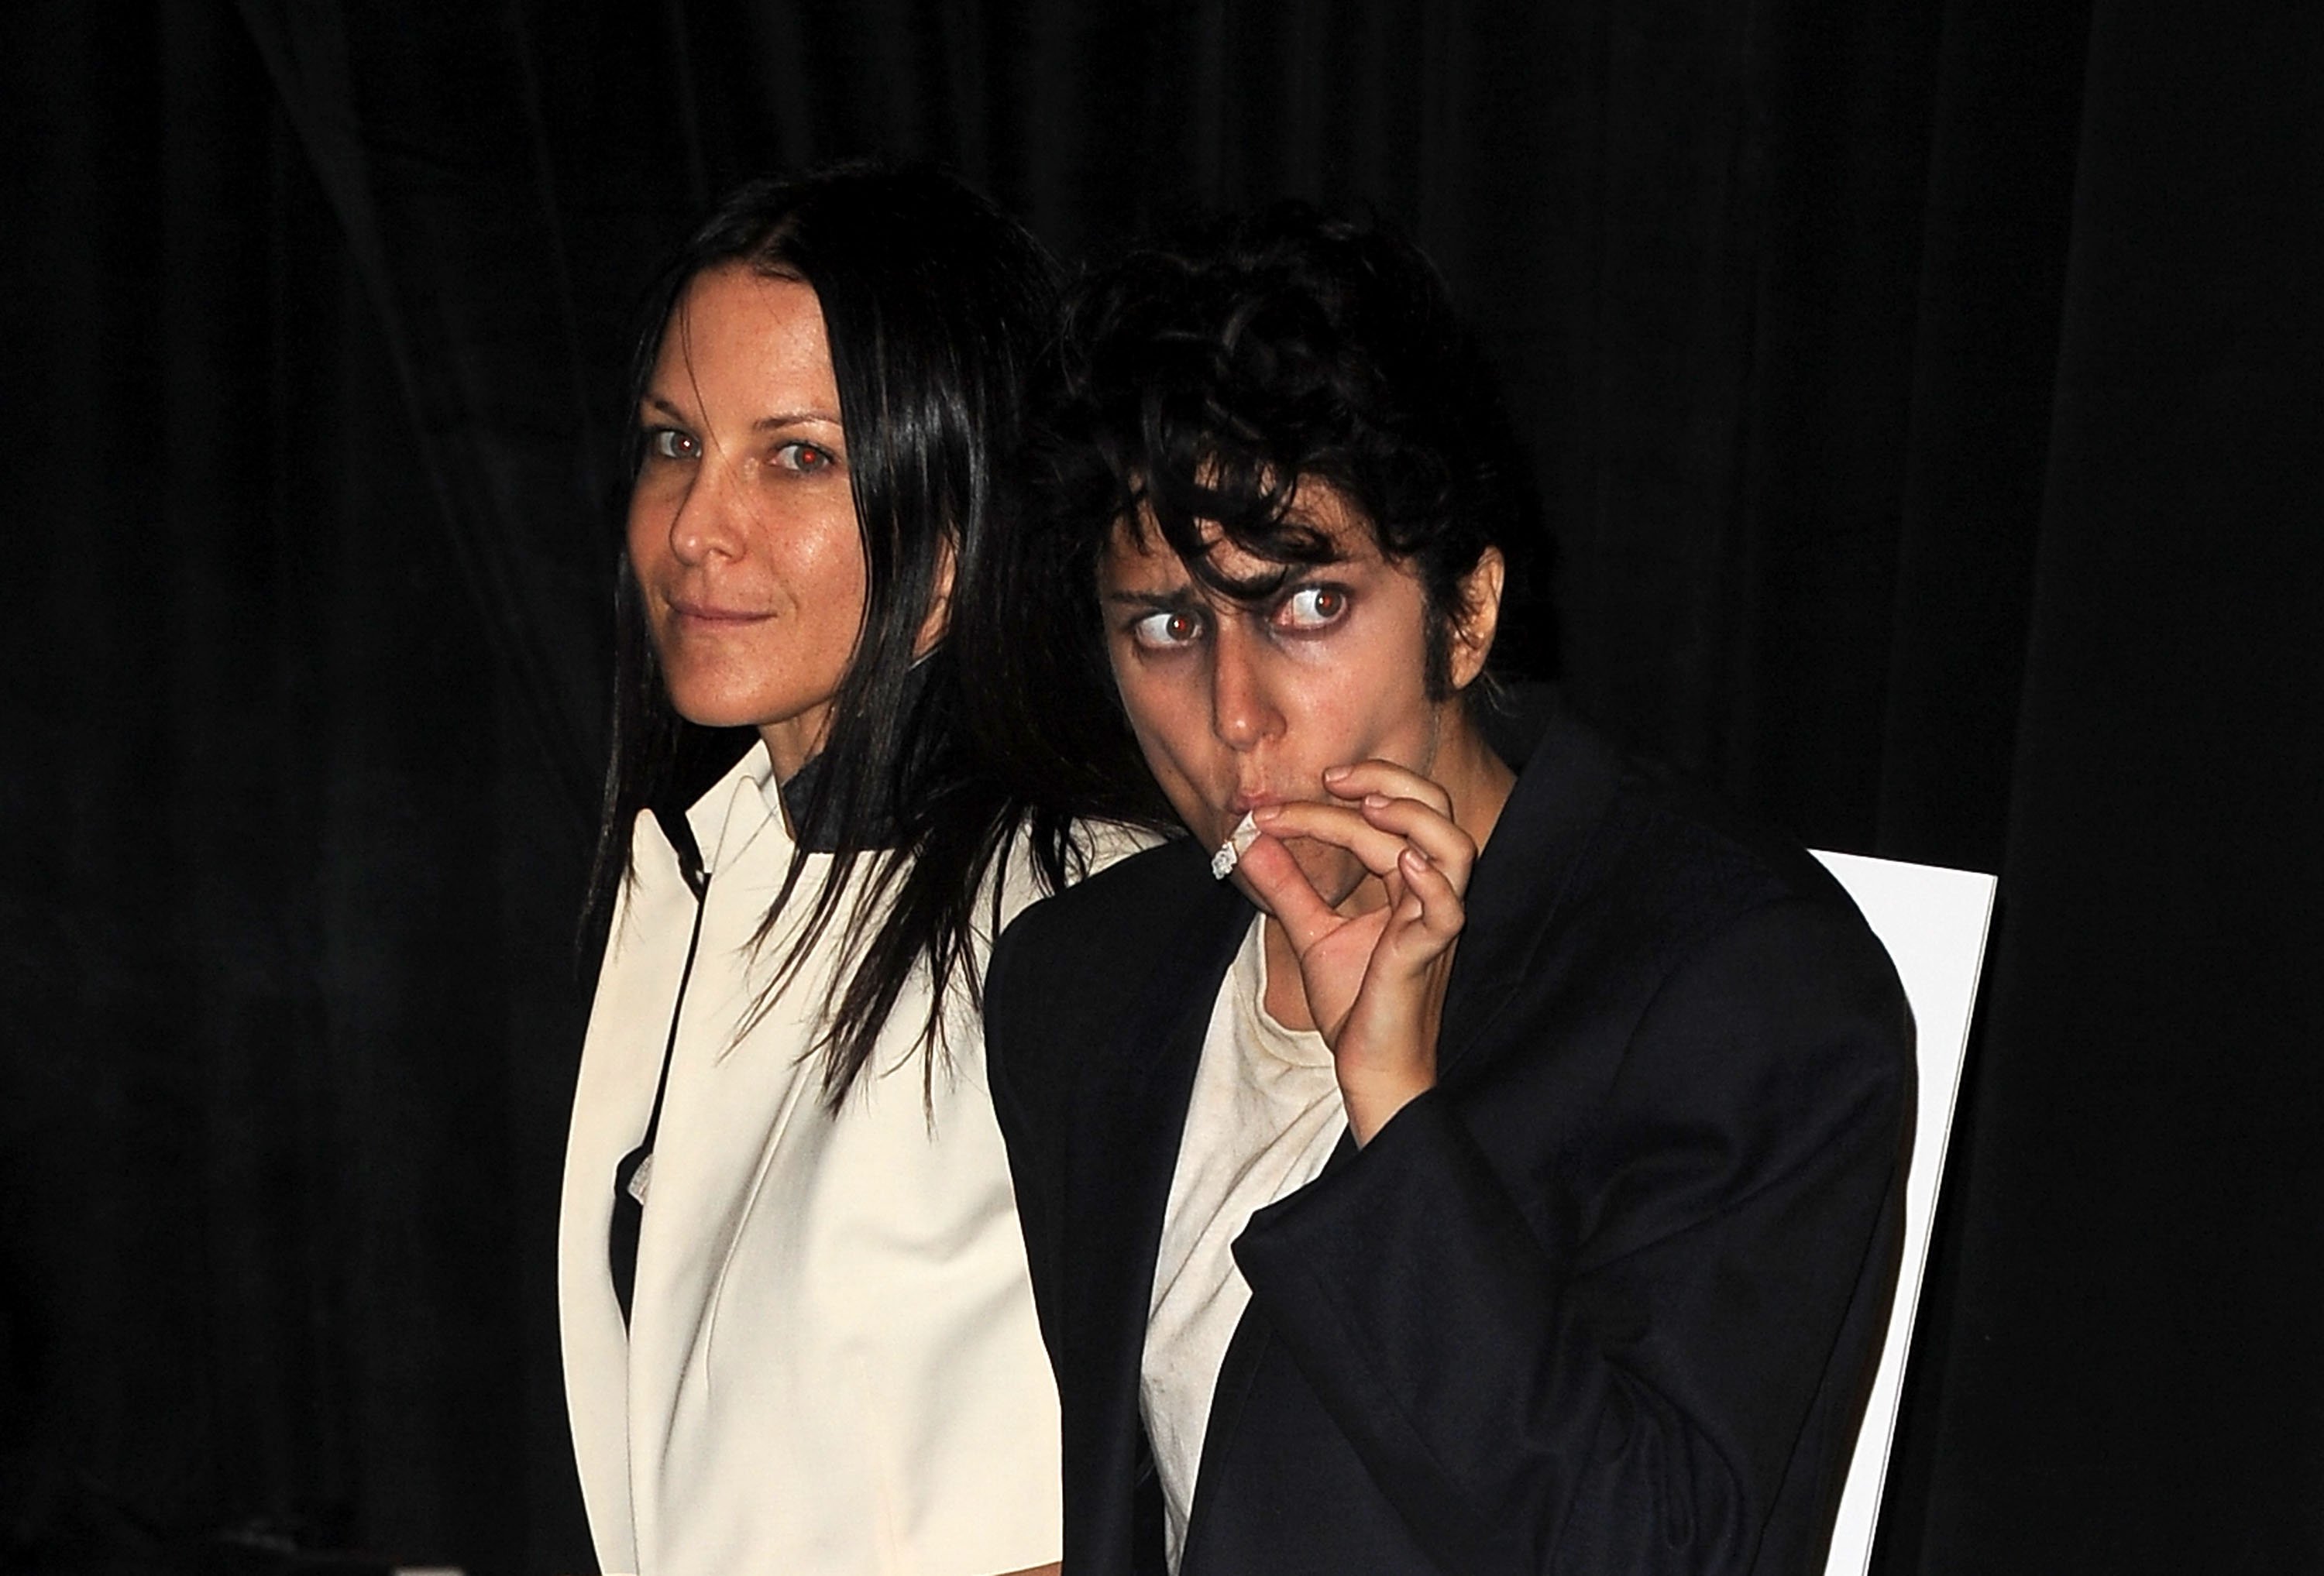 Singer Lady Gaga dressed as 'Jo Calderone,' winner of Best Female Video Award and Best Video with a Message Award for 'Born This Way'